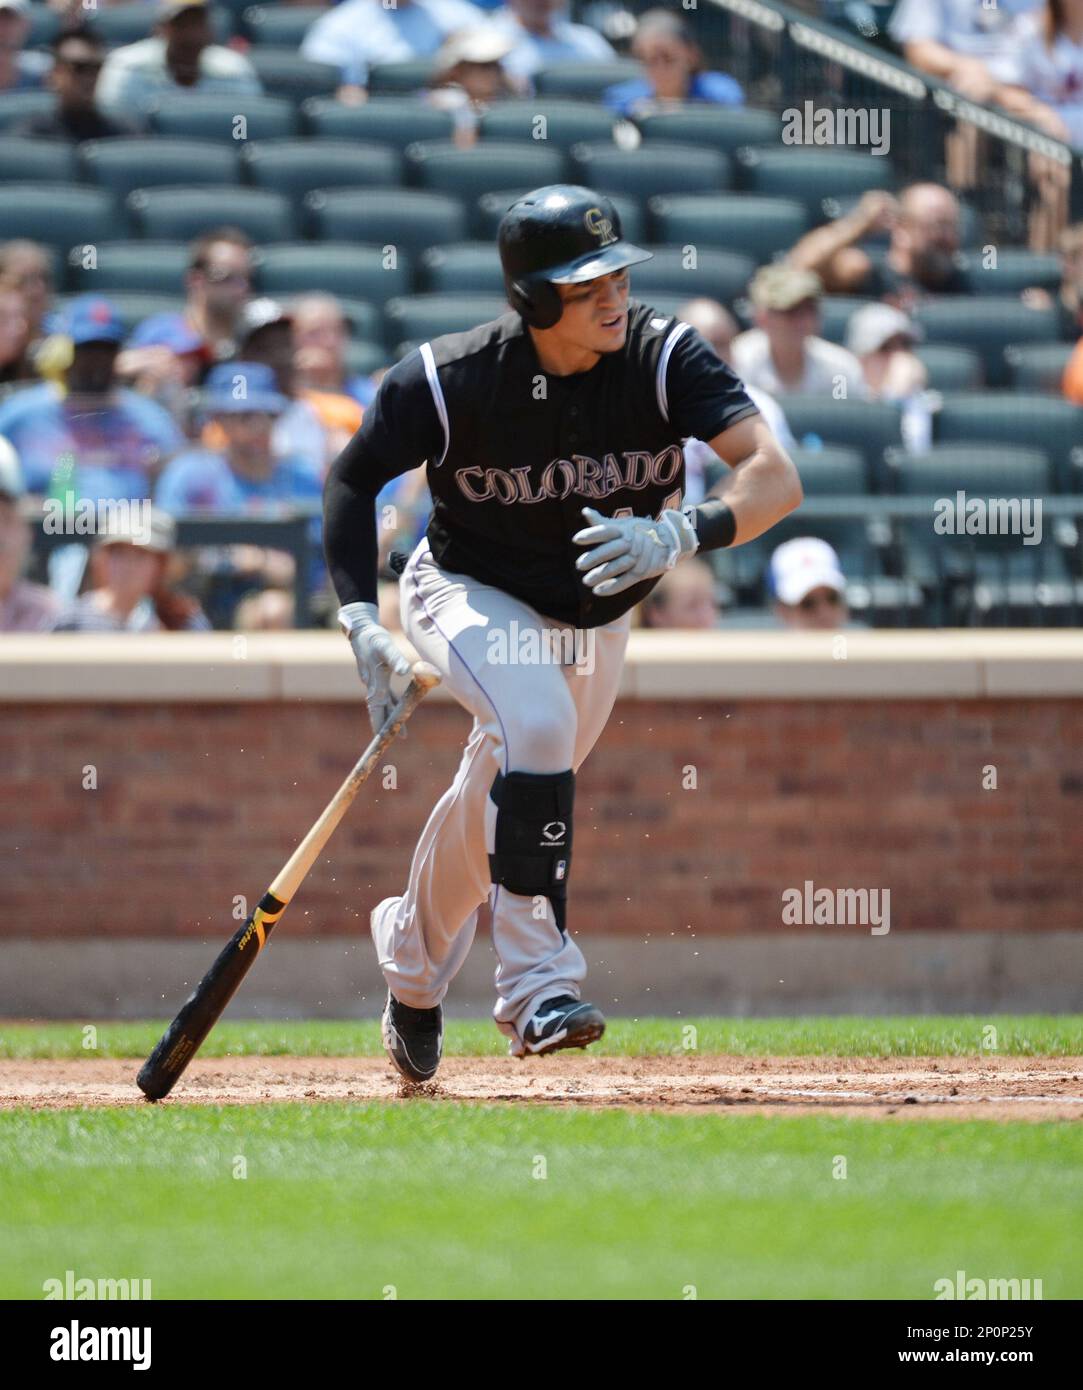 Colorado Rockies catcher Tony Walters (14) during game against the New York  Mets at Citi Field